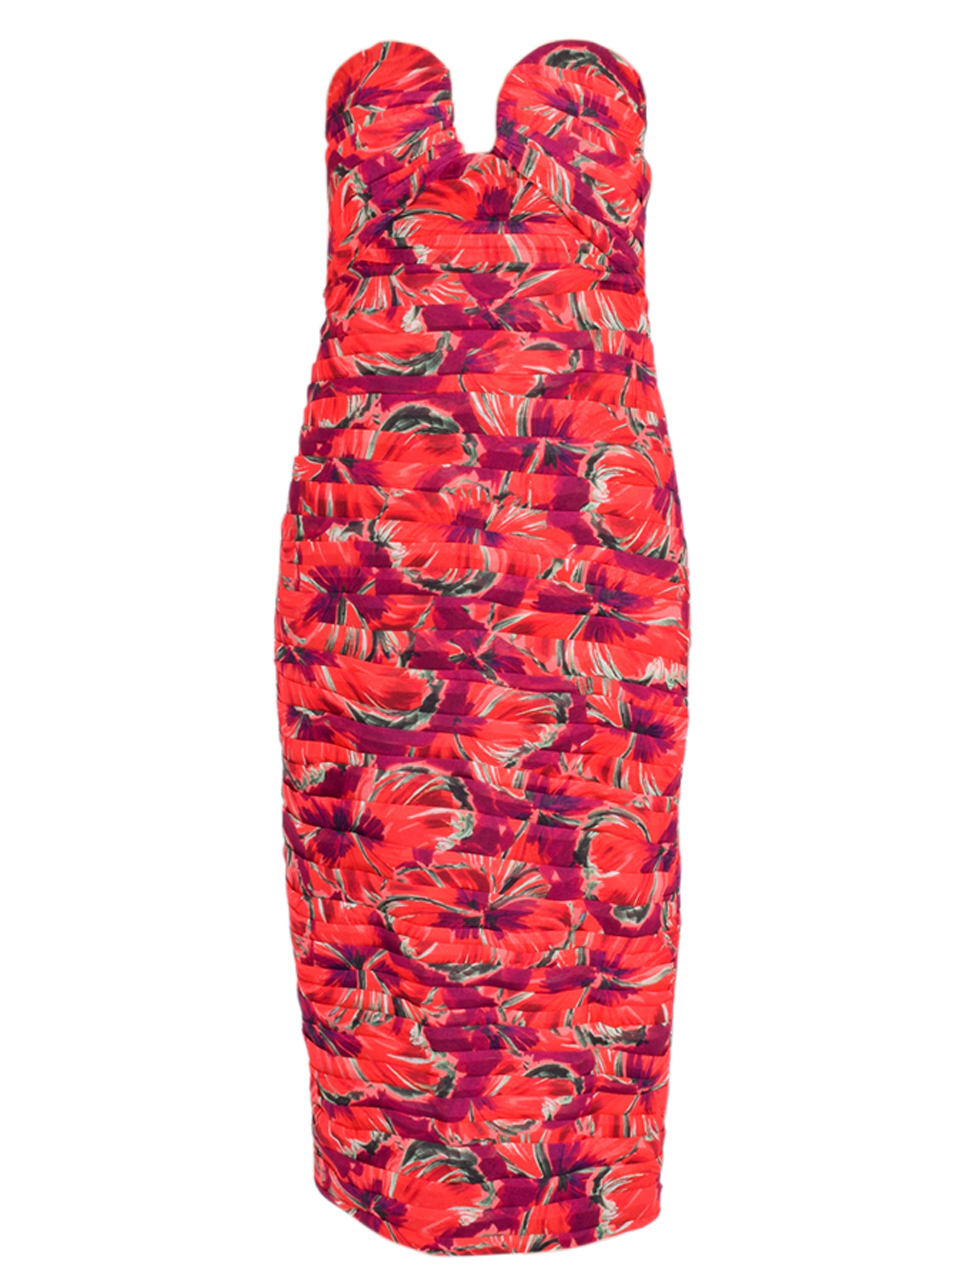 MILLY Windmill Floral Chiffon Dress in Red Multi Product Shot 